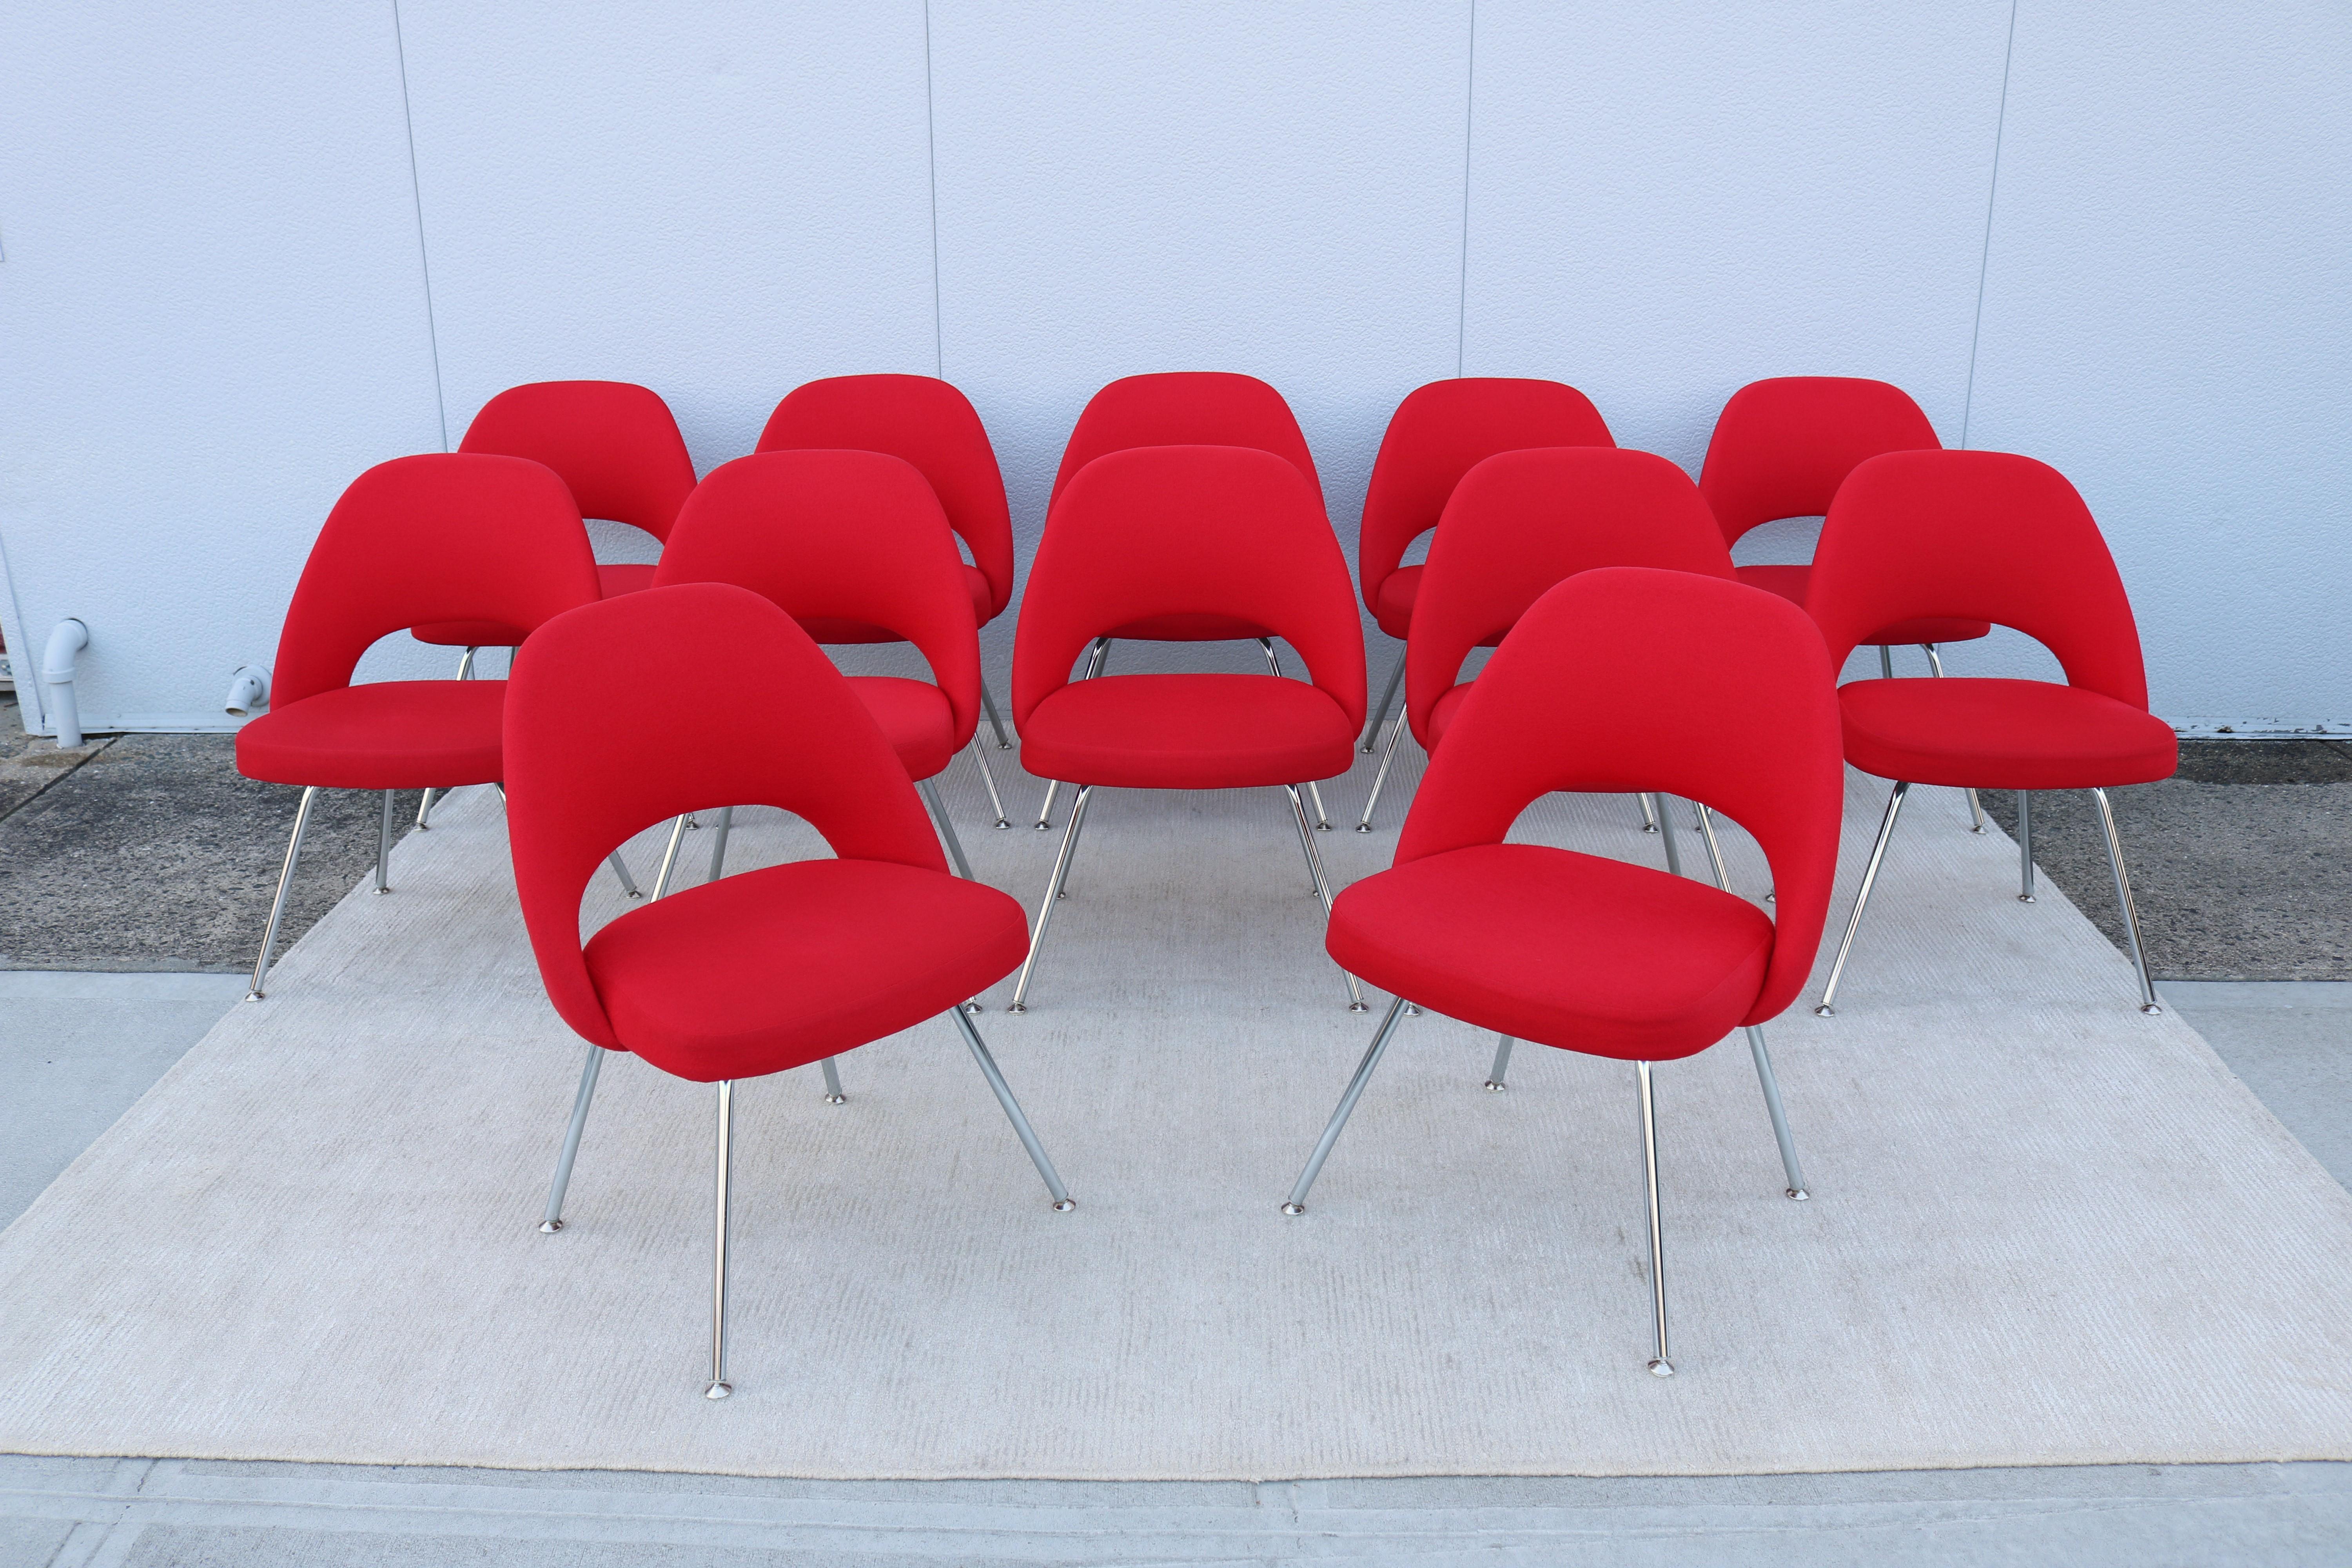 American Mid-Century Modern Eero Saarinen Knoll Red Executive Armless Chairs - Set of 12 For Sale